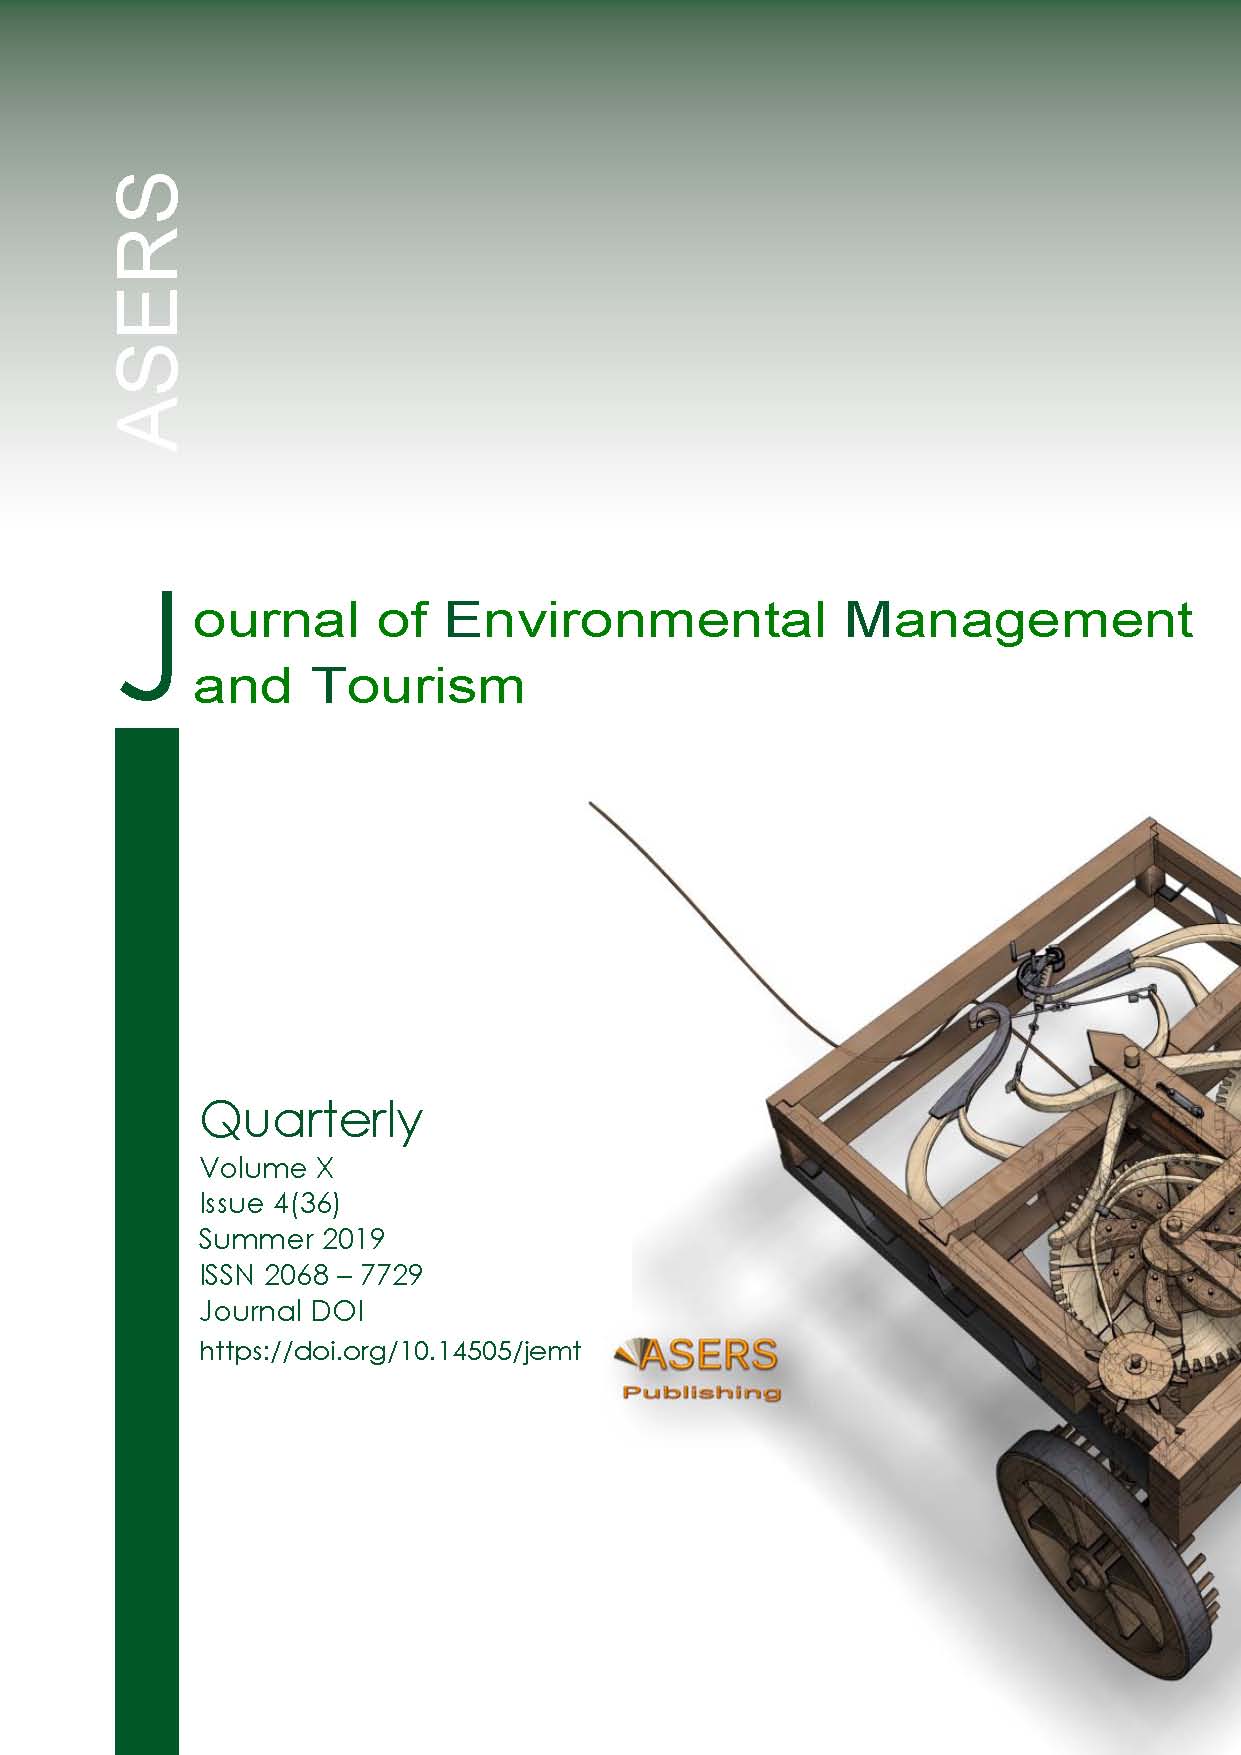 Thai Tourists Choice of Accommodation based on Marketing Behaviors in Vang Vieng Town, Lao People’s Democratic Republic Cover Image